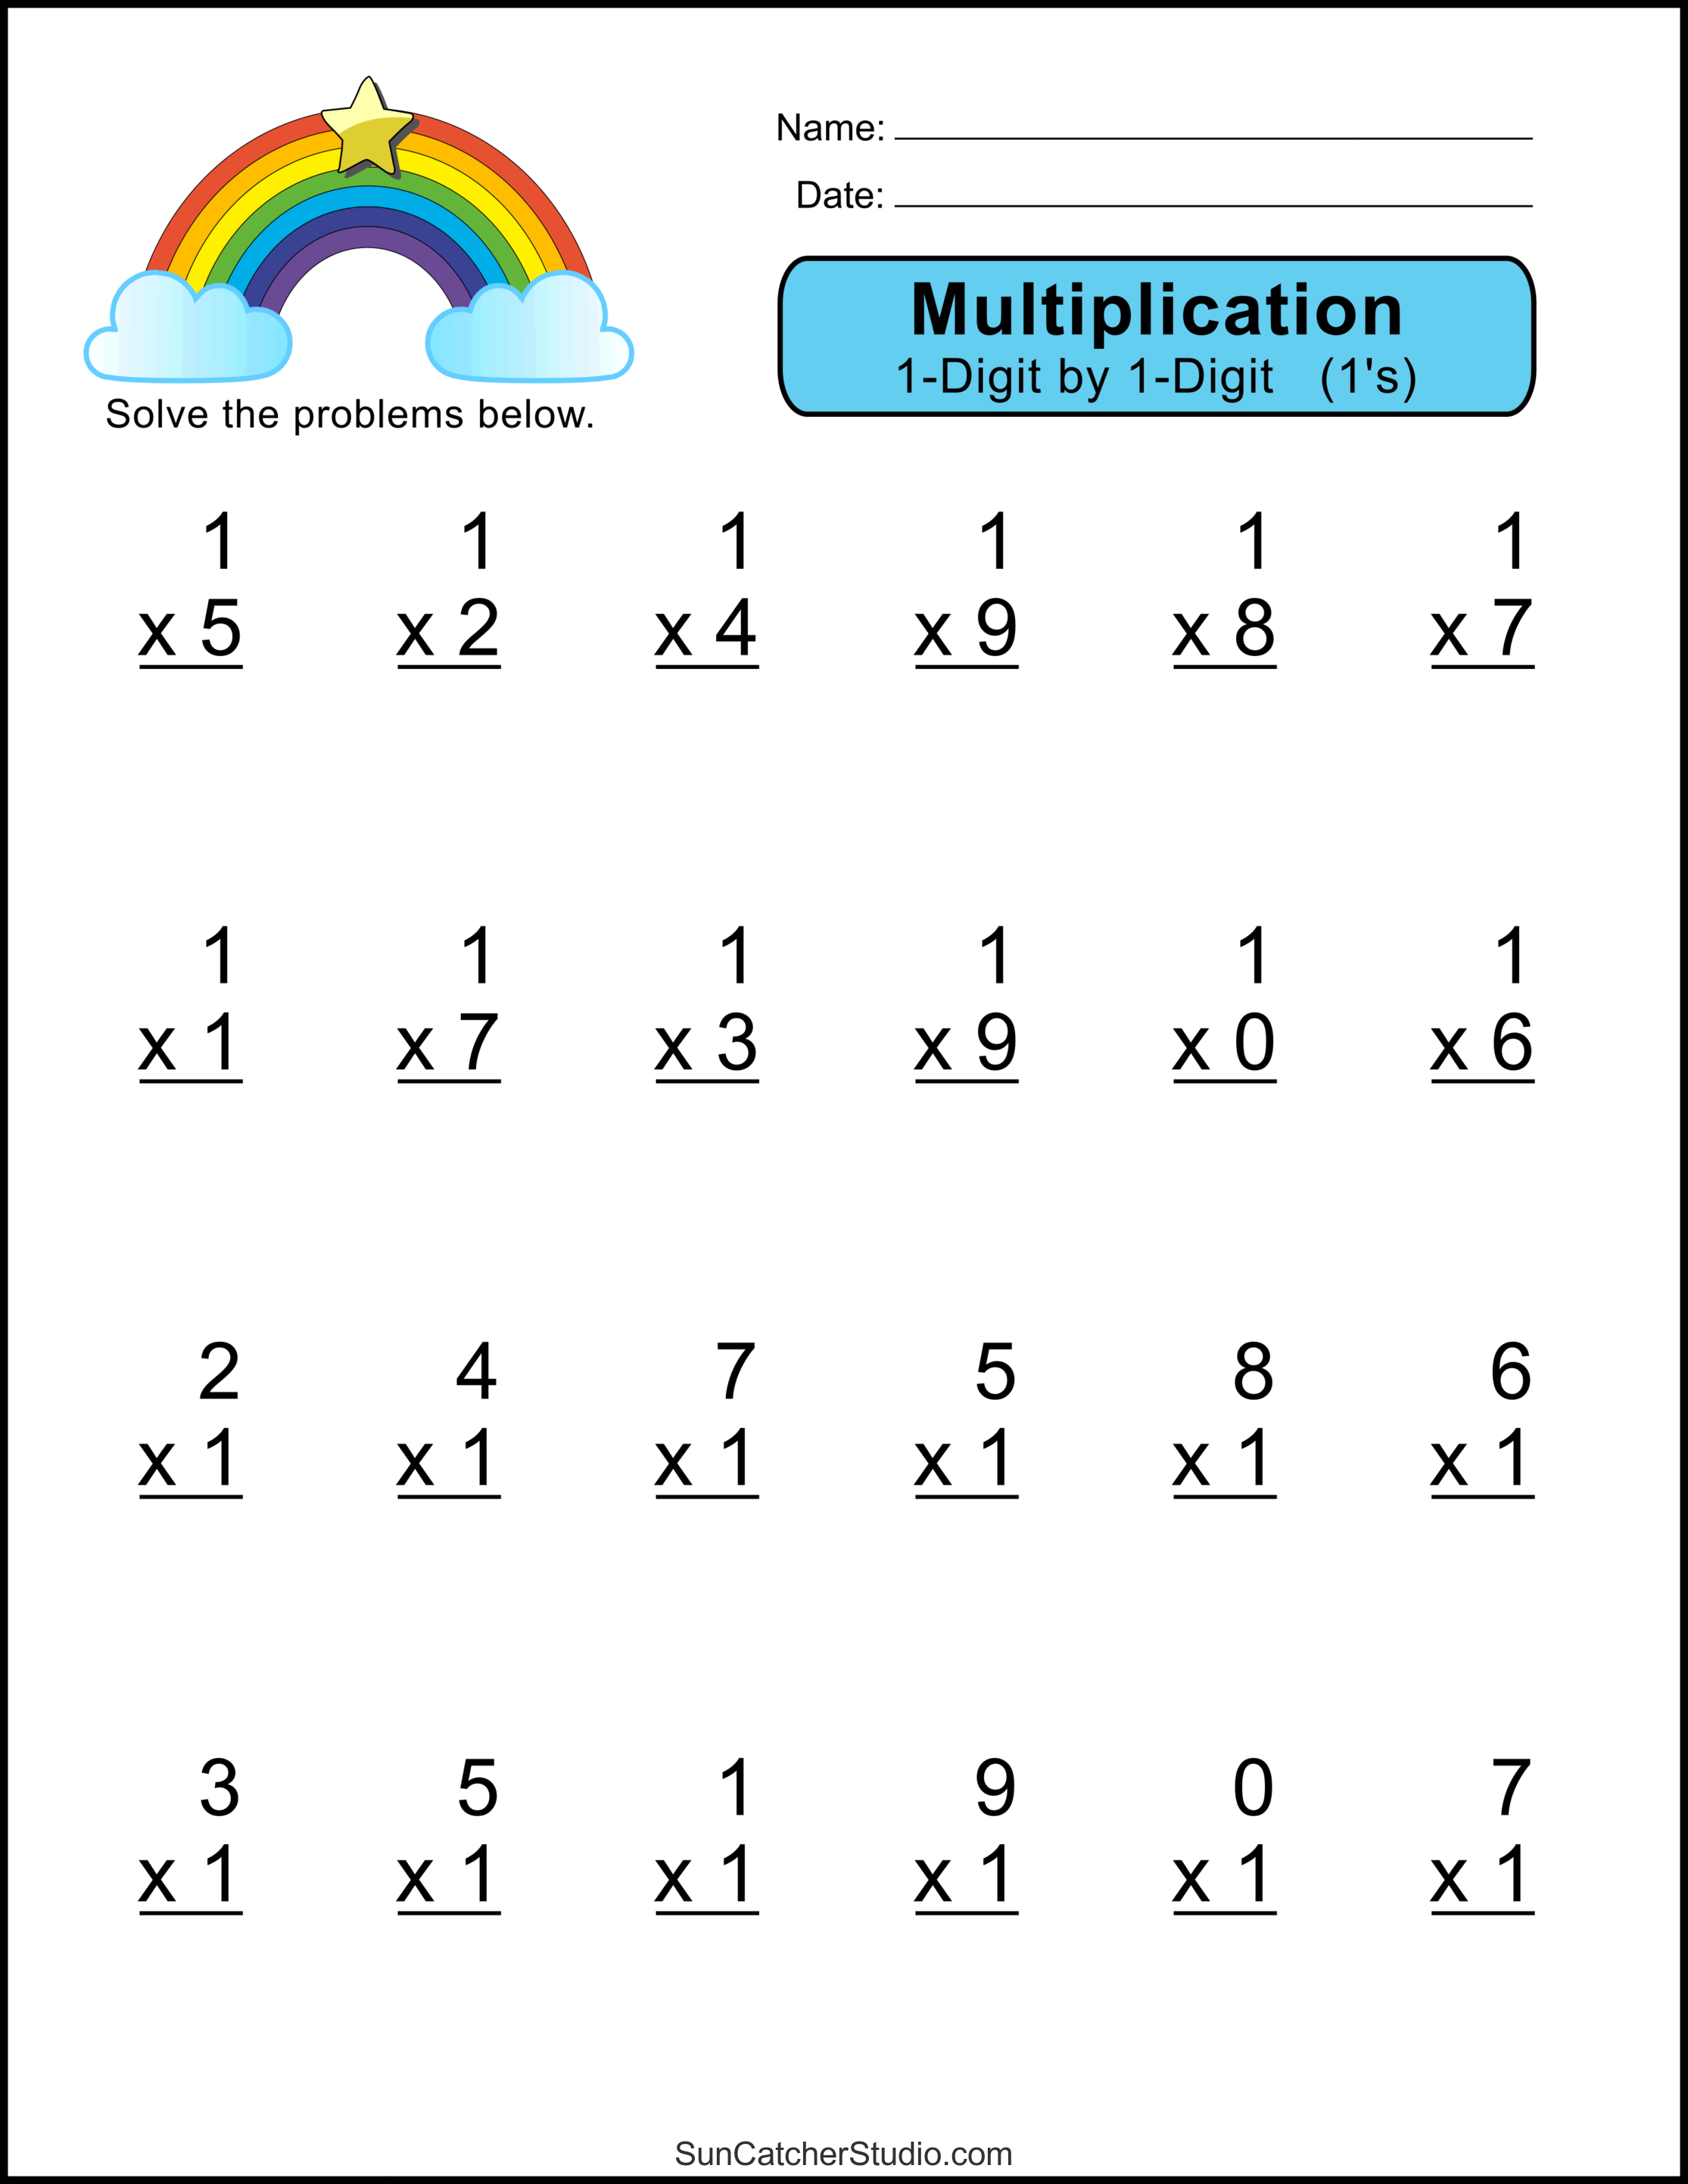 Multiplication Worksheets One Digit Math Drills DIY Projects Patterns Monograms Designs Templates